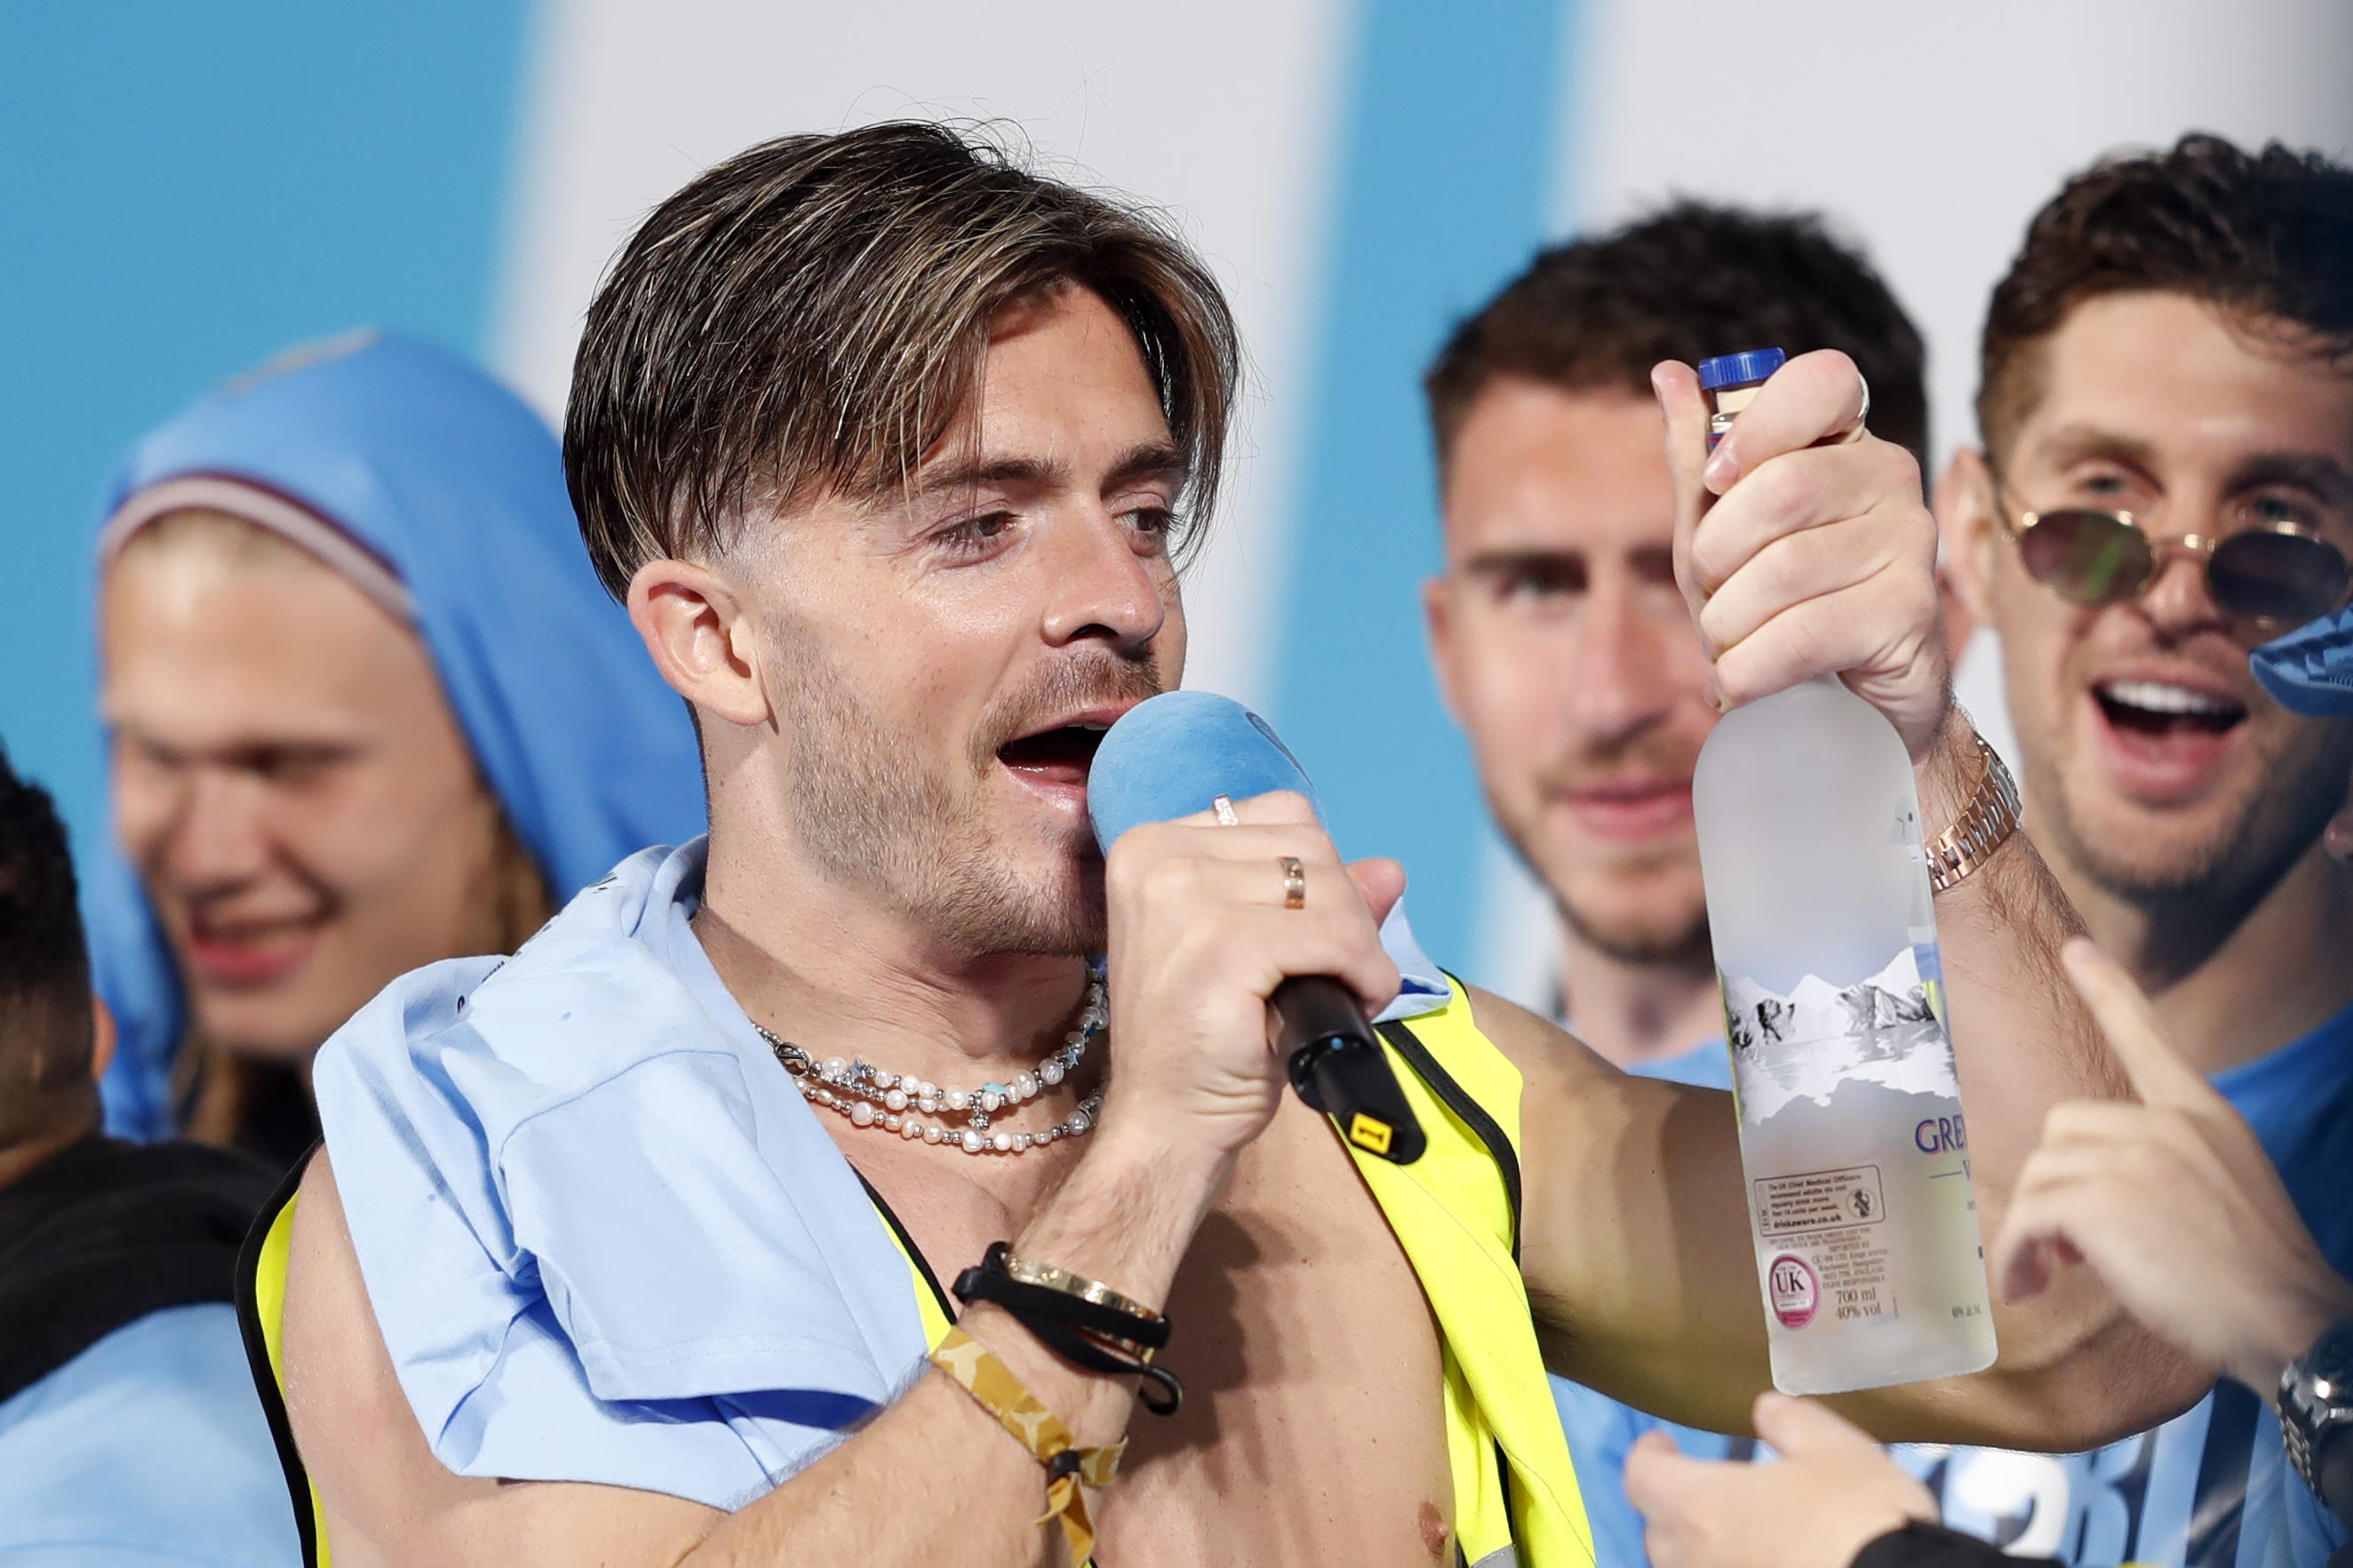 Manchester City’s Jack Grealish with a bottle of vodka on stage (Will Matthews/PA)